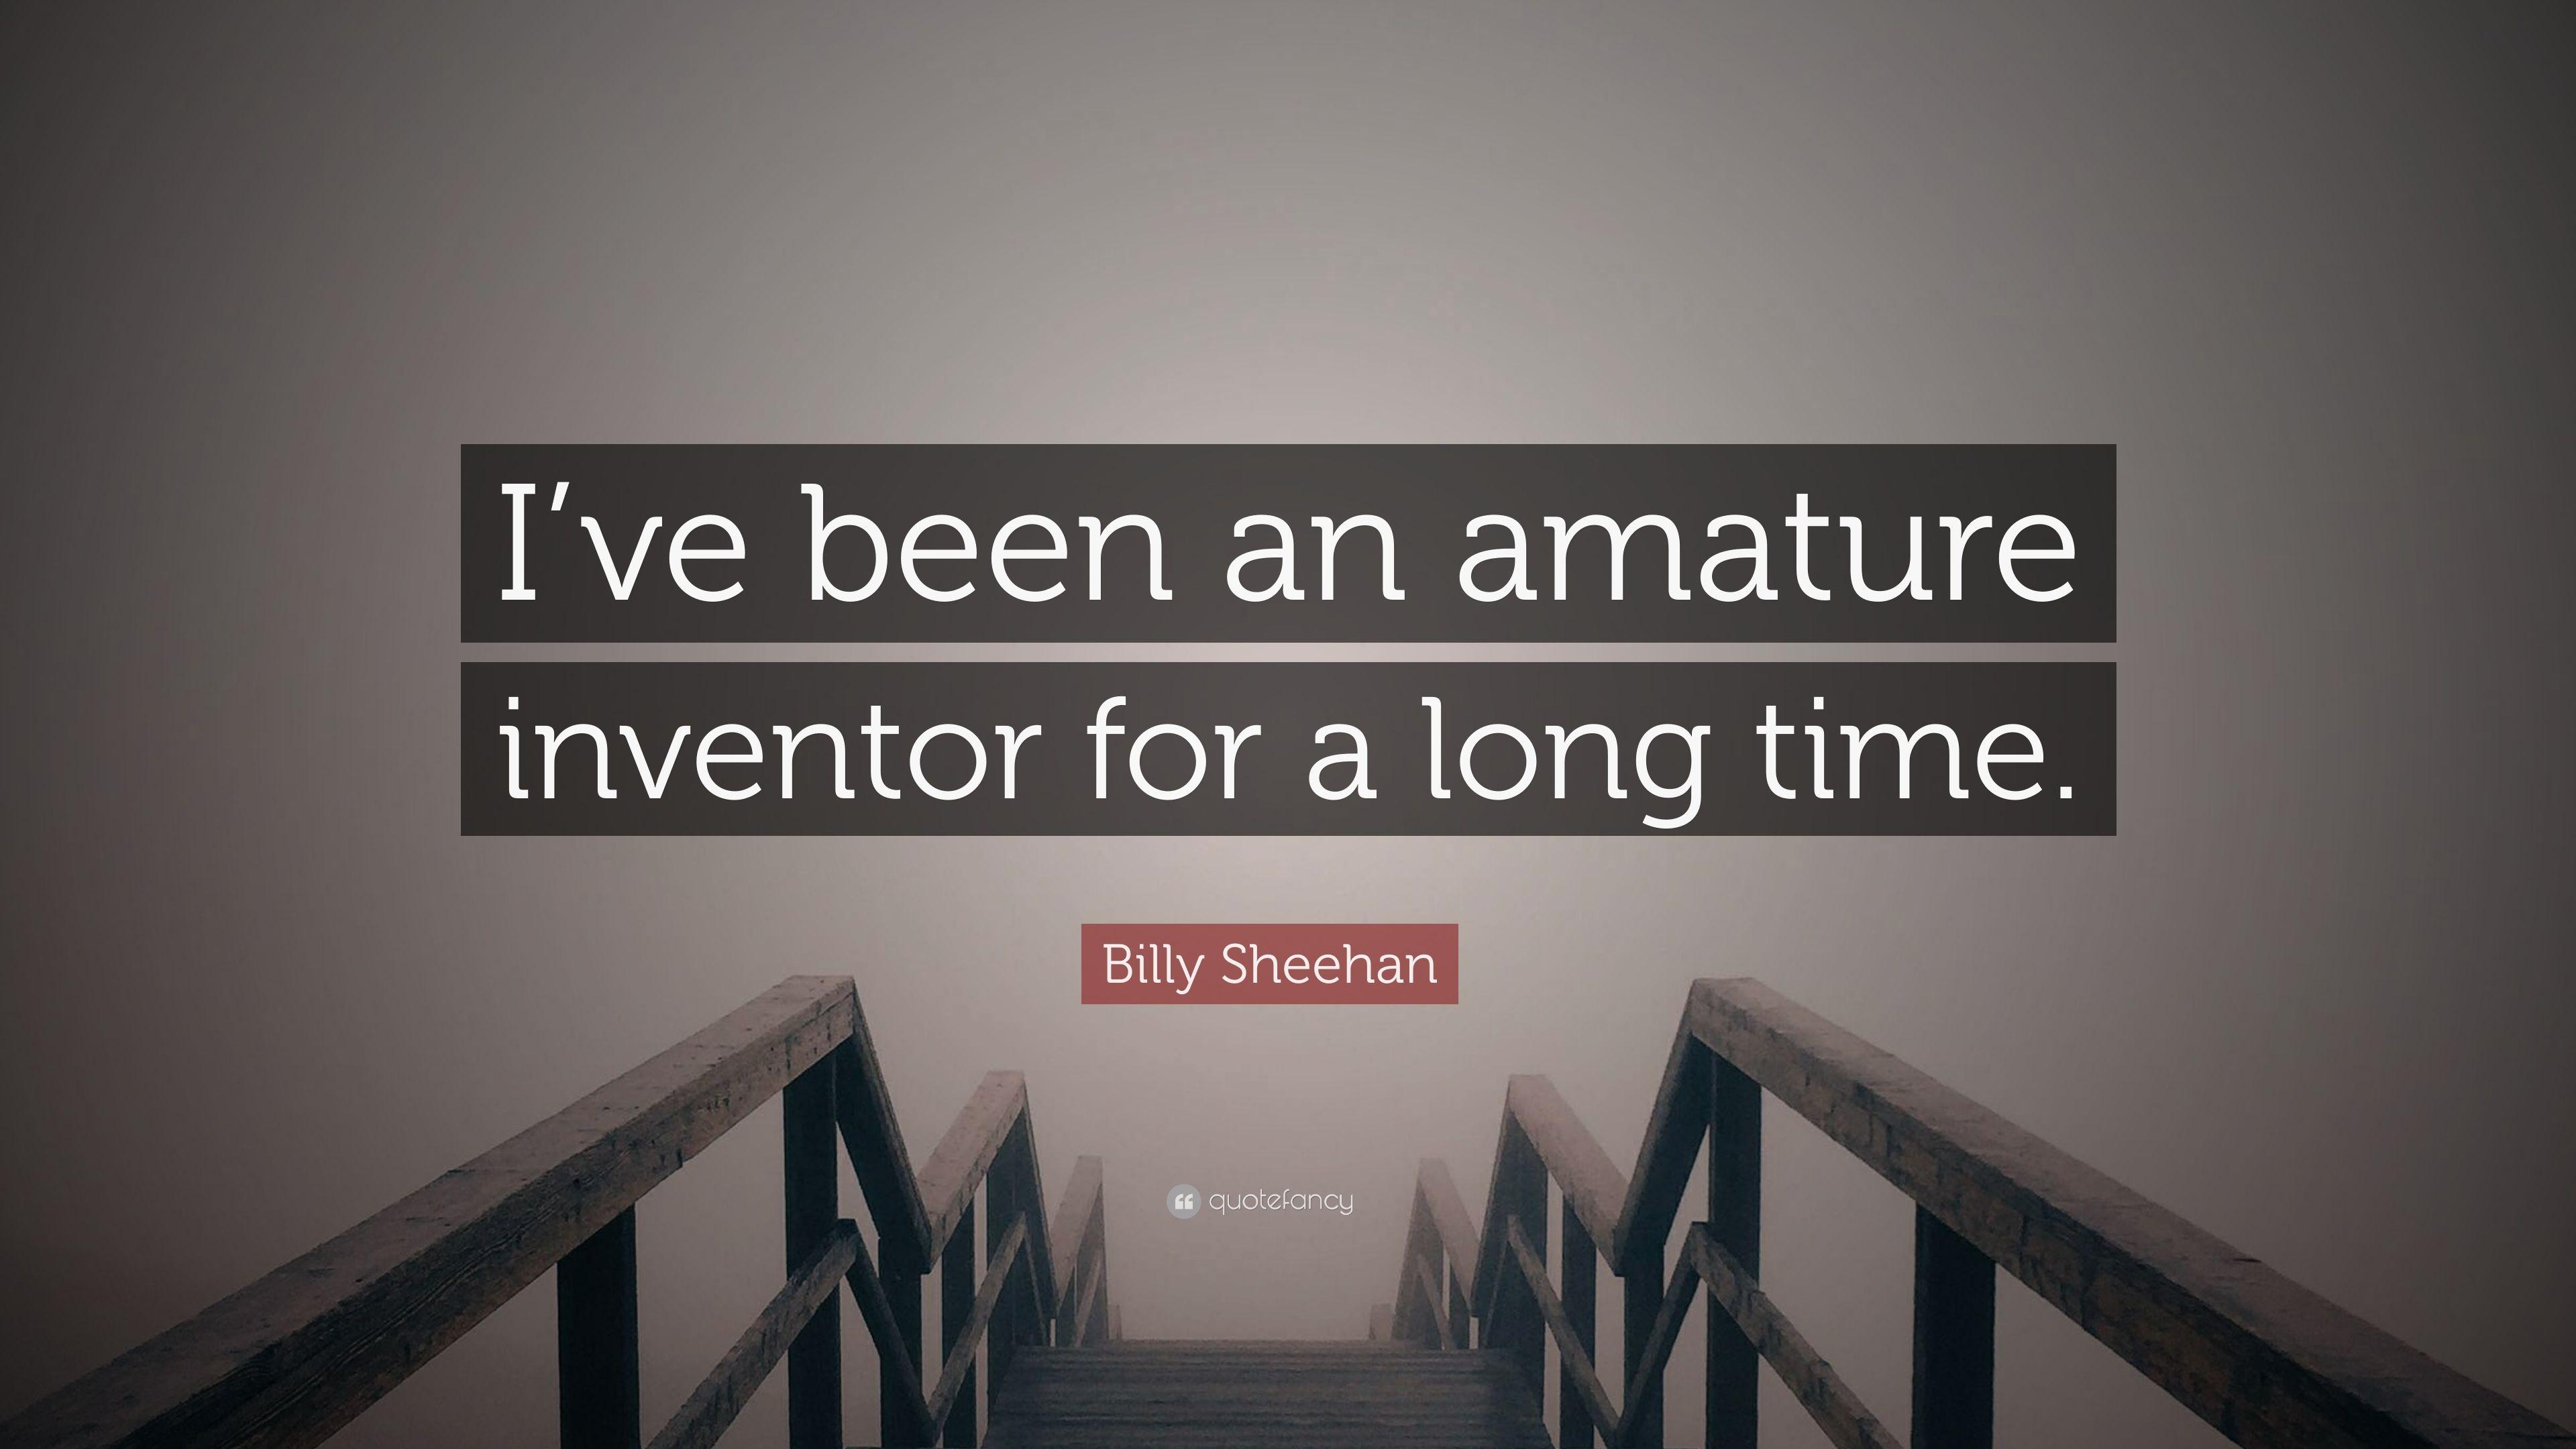 Billy Sheehan Quote: “I've been an amature inventor for a long time